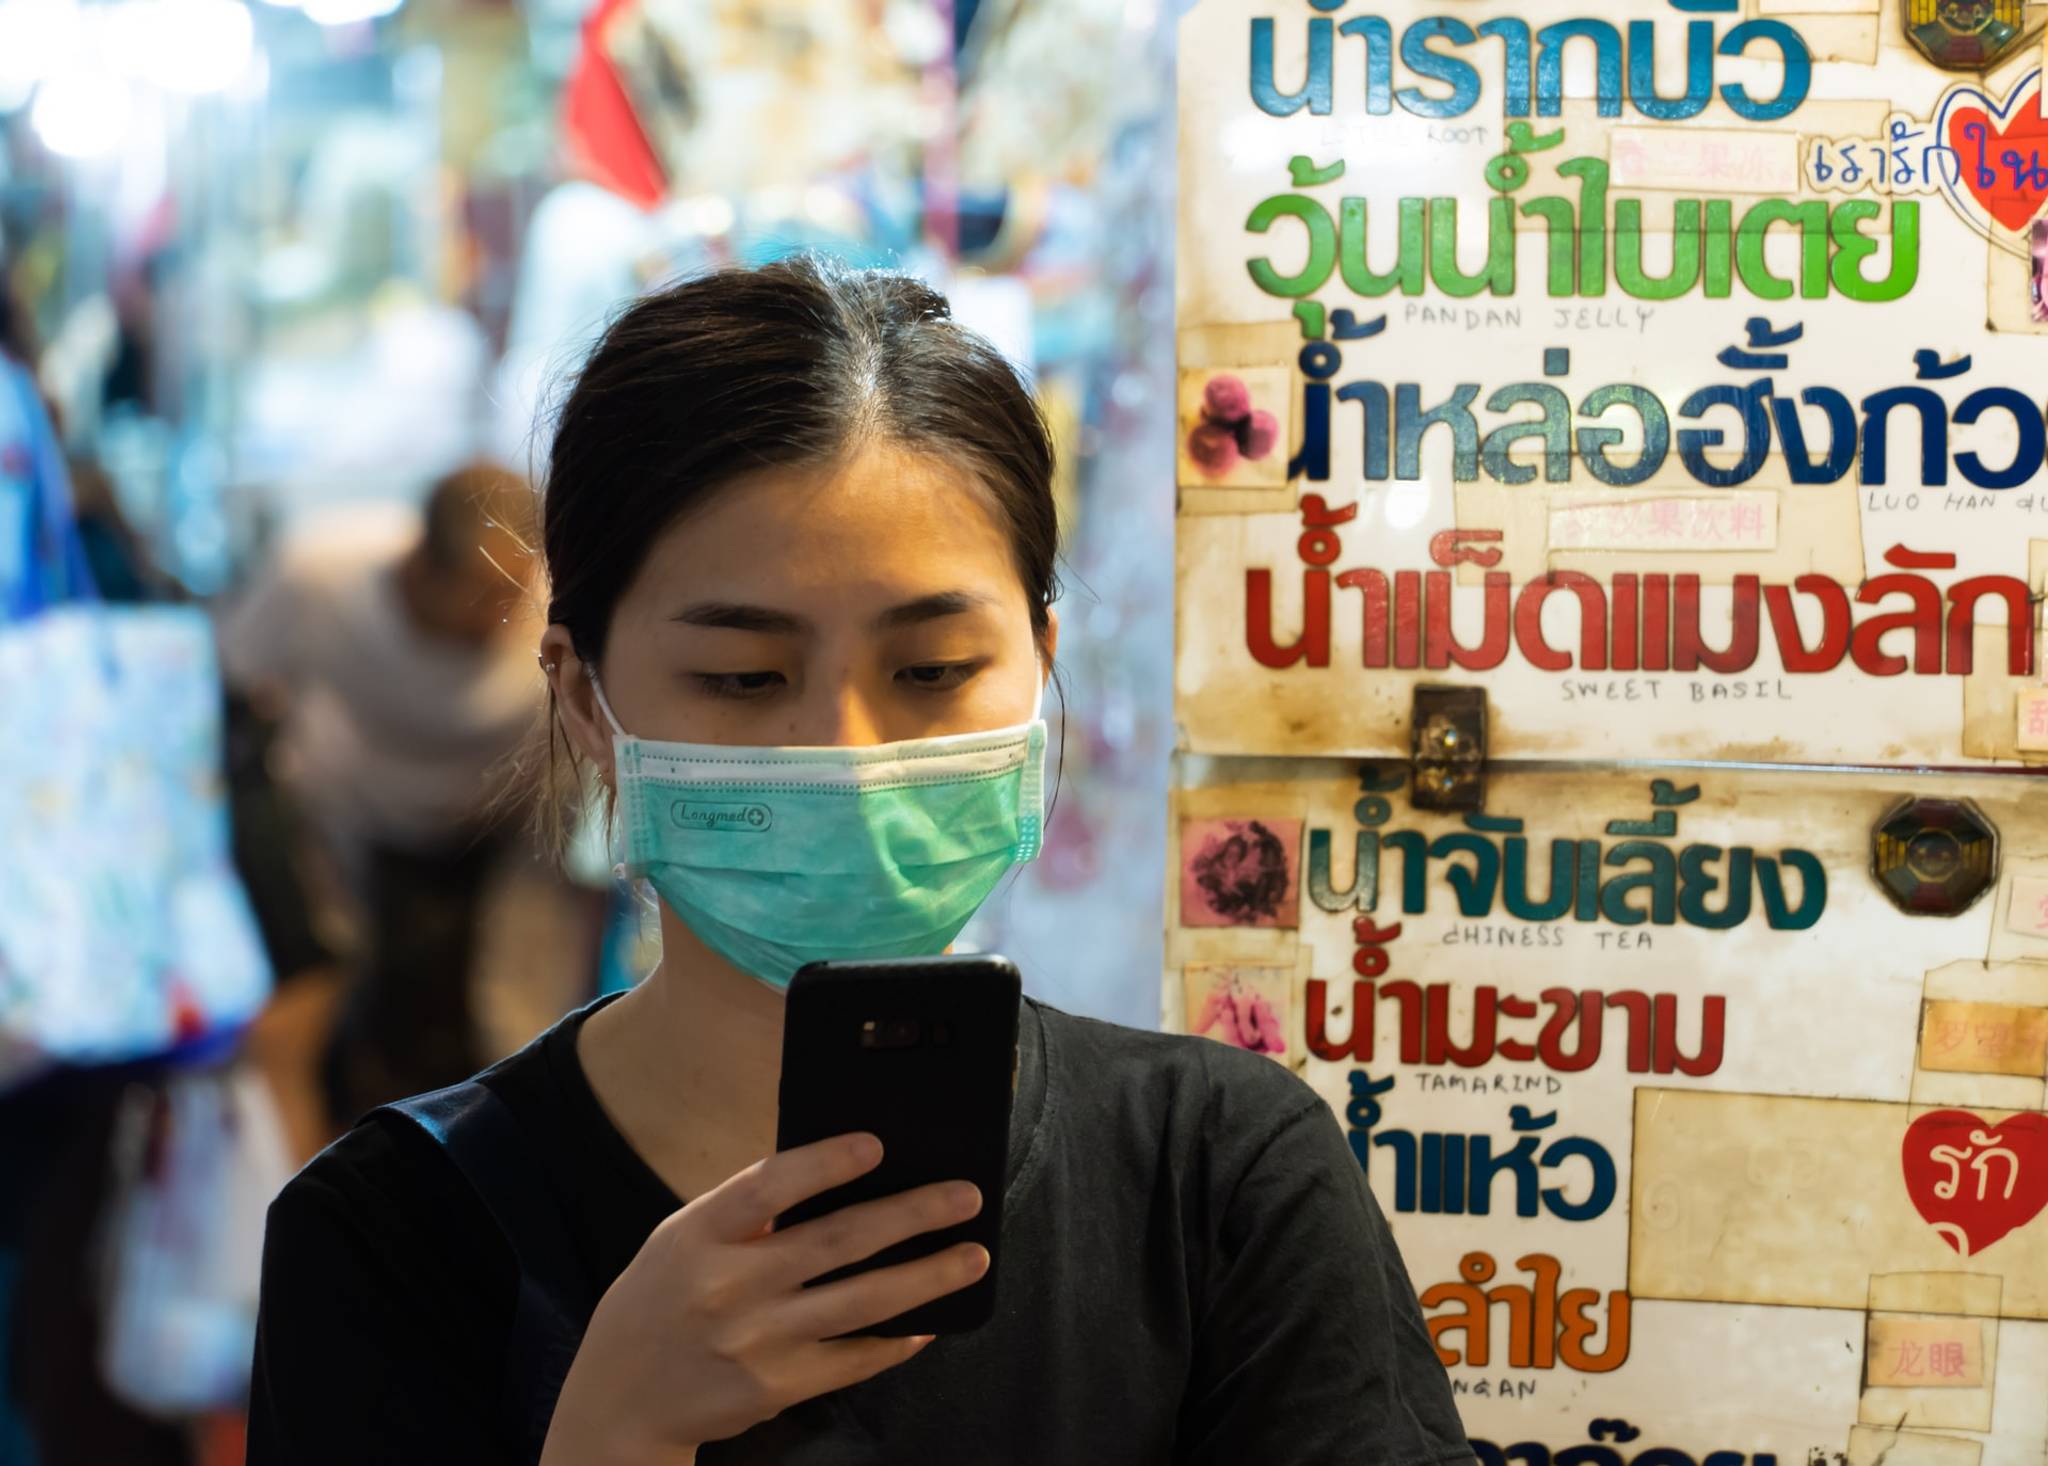 Euda app speeds up remote access to doctors in Asia